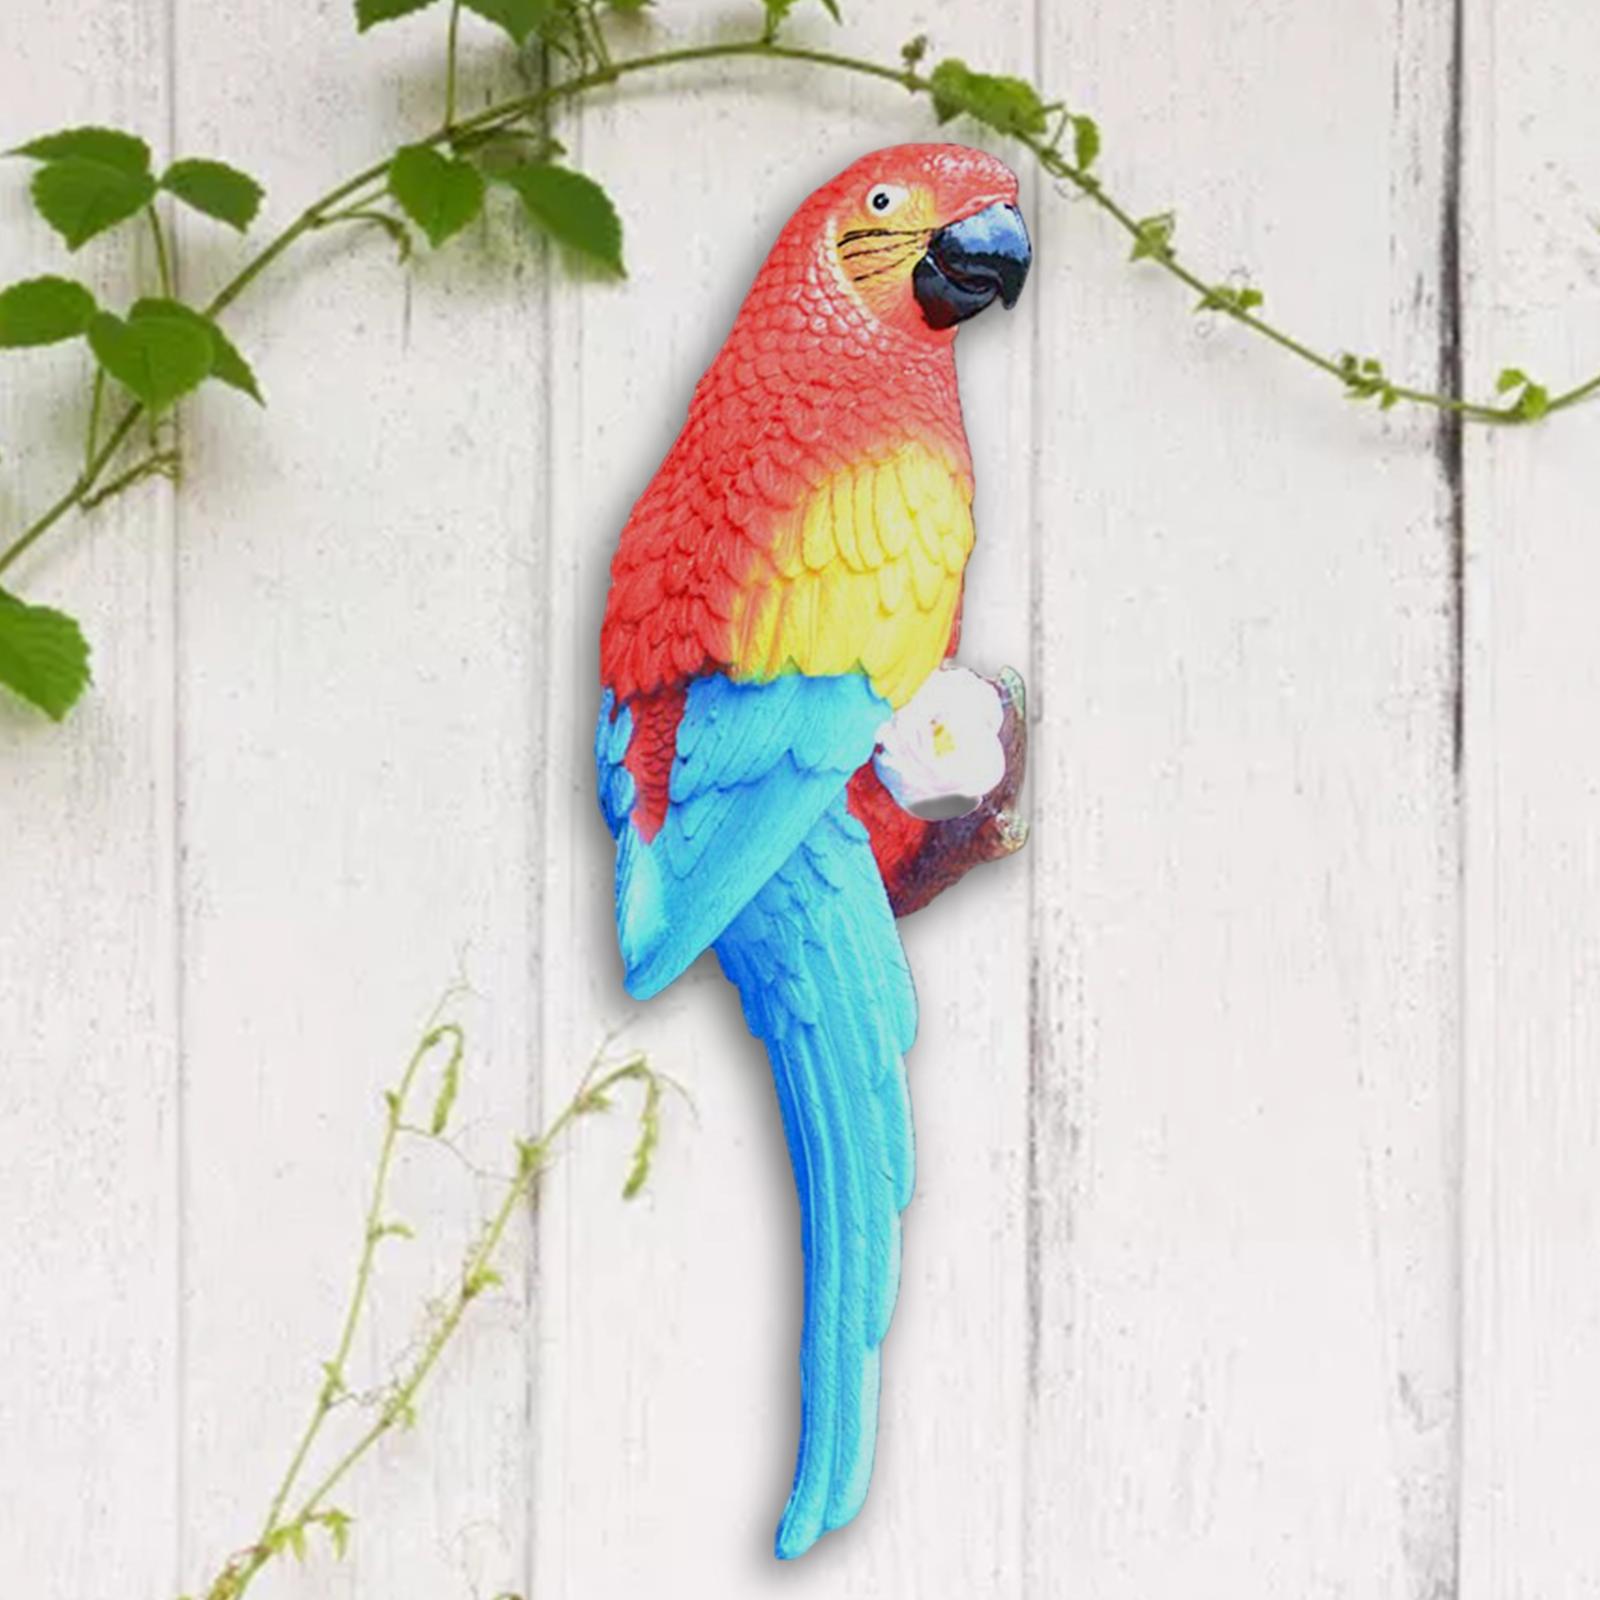 Feather Parrot Macaw Ornaments Animal Model Photo Props for Lawn Yard Red